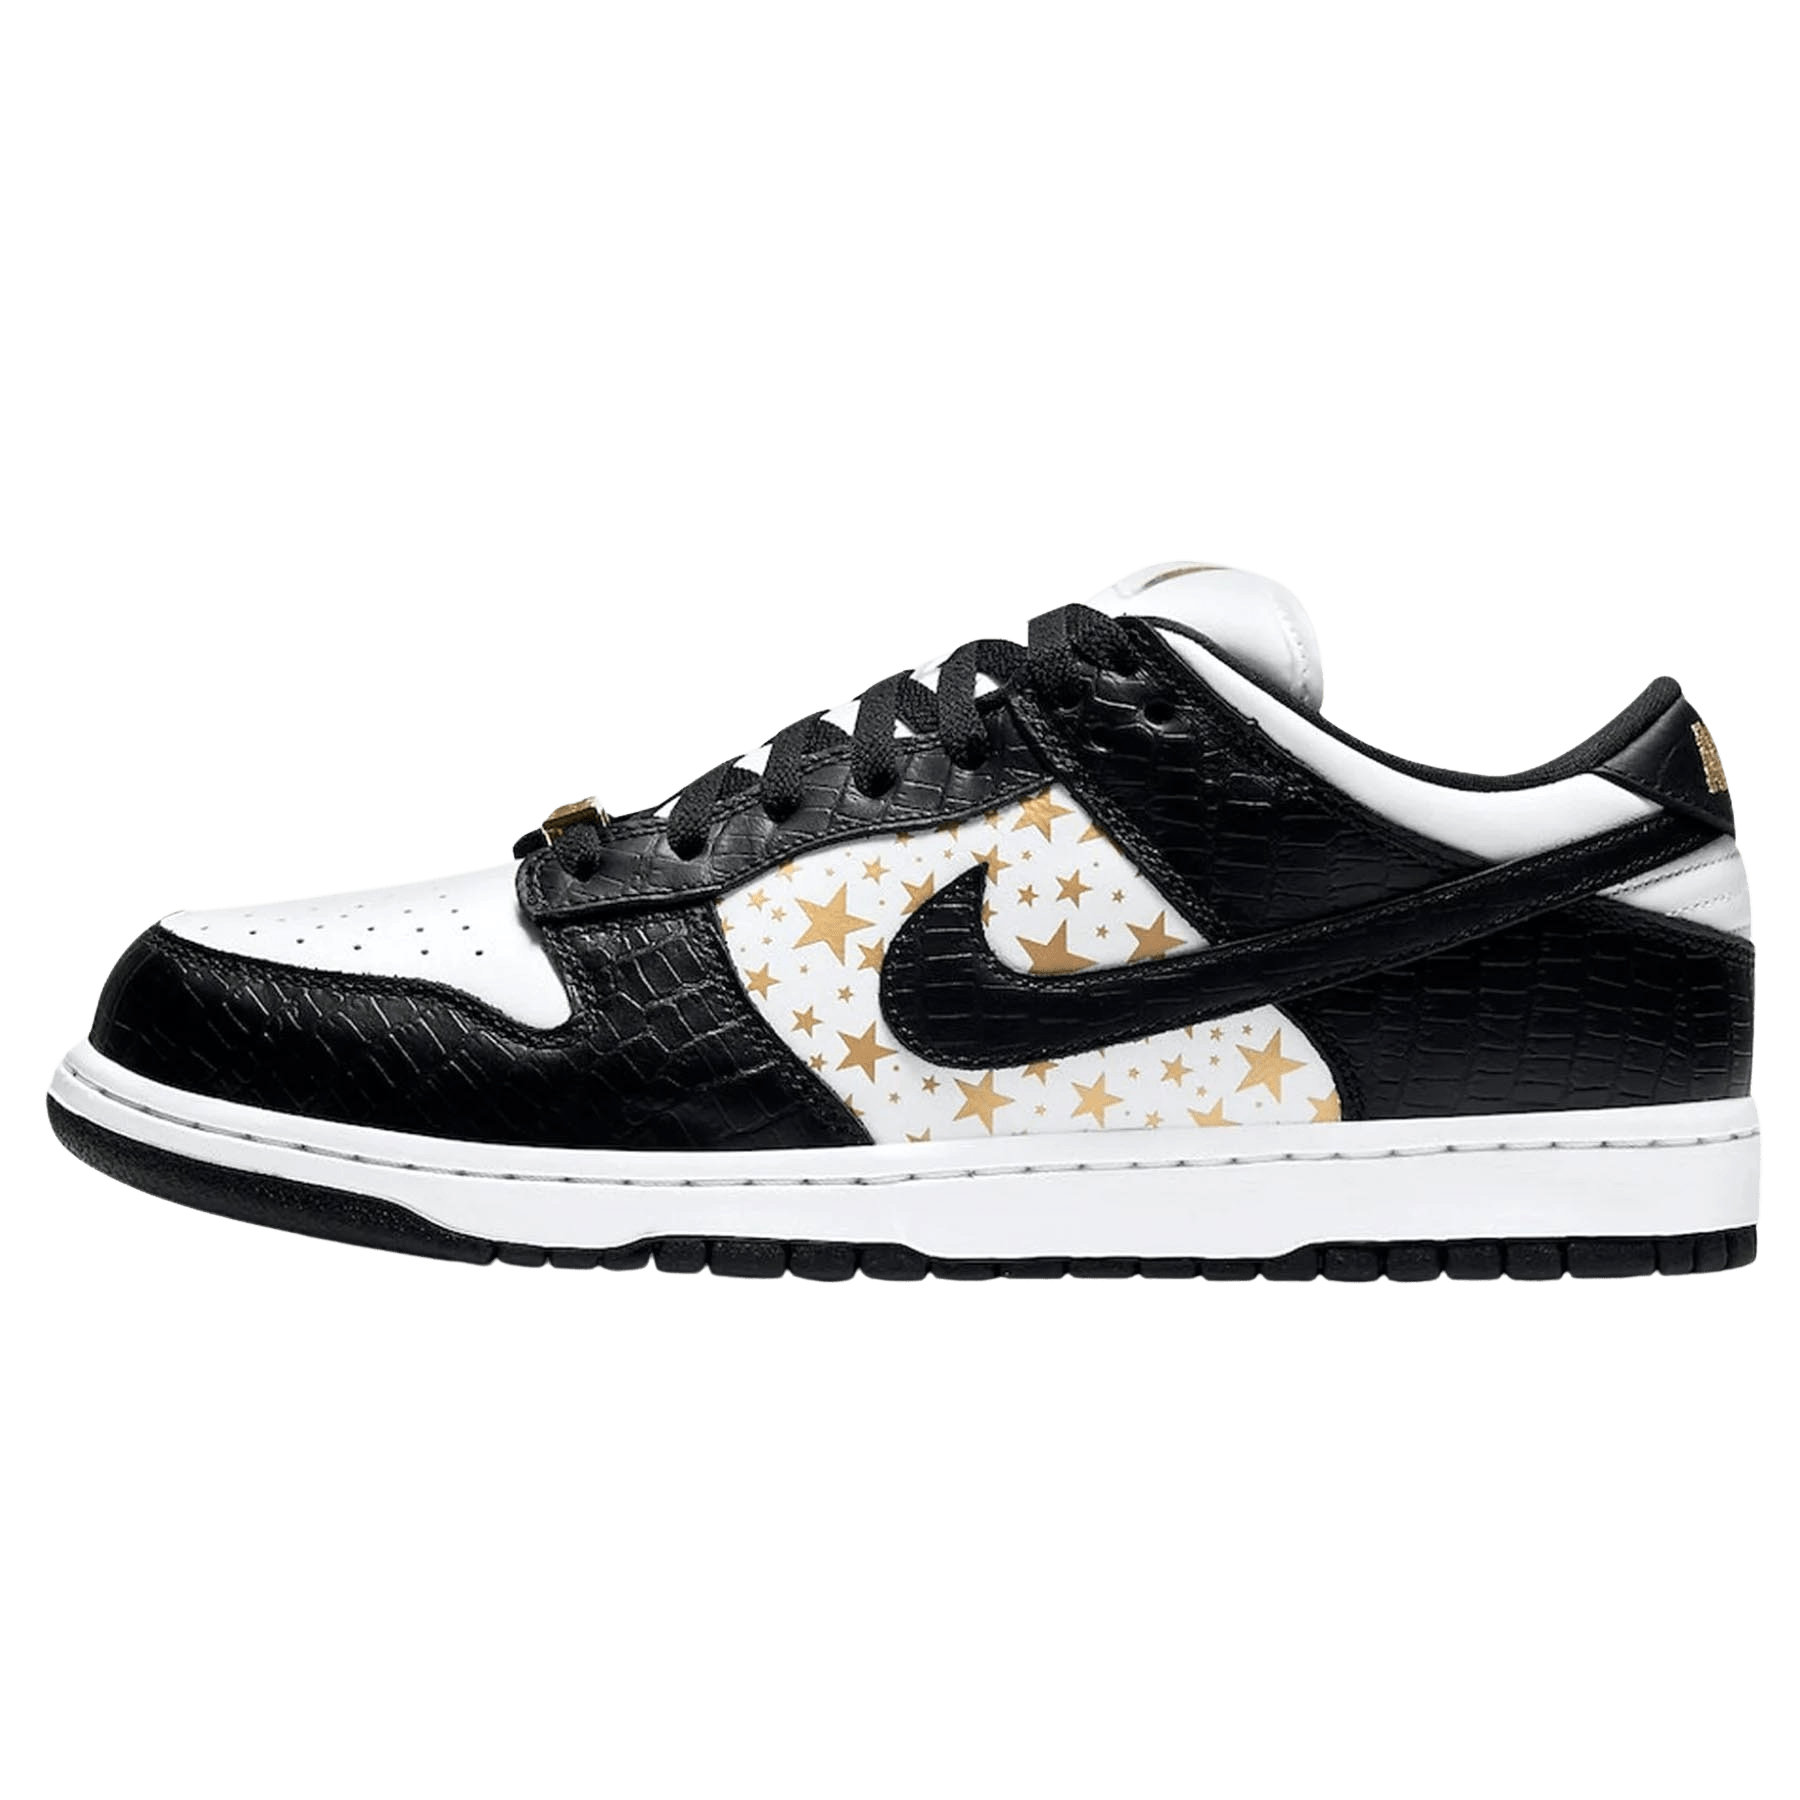 Nike SB Dunk Low Pro 'Supa' from The Collection of DJ AM